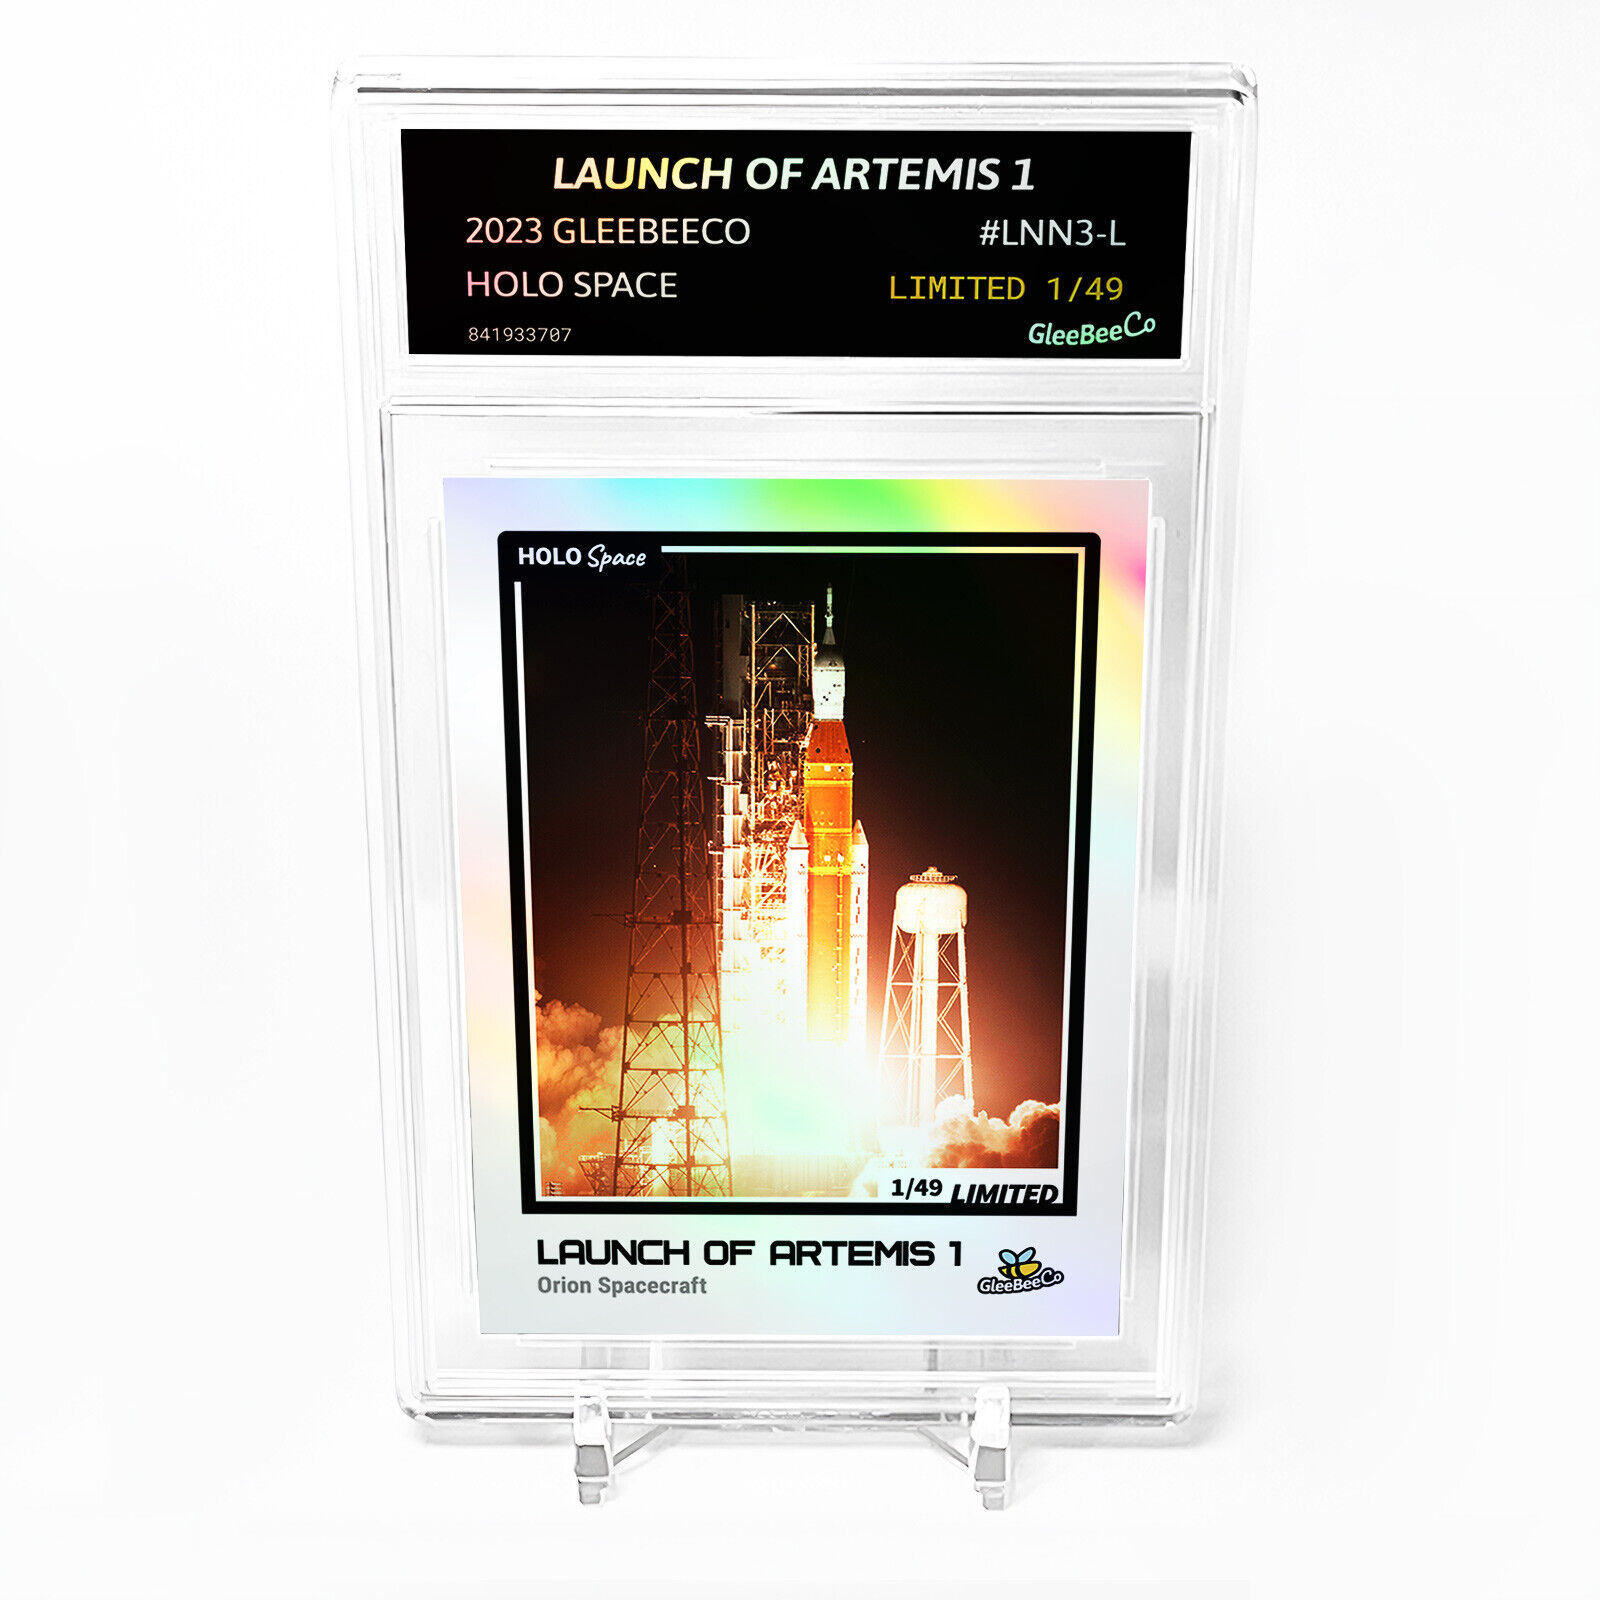 LAUNCH OF ARTEMIS 1 Orion Spacecraft 2023 GleeBeeCo Holo Card #LNN3-L /49